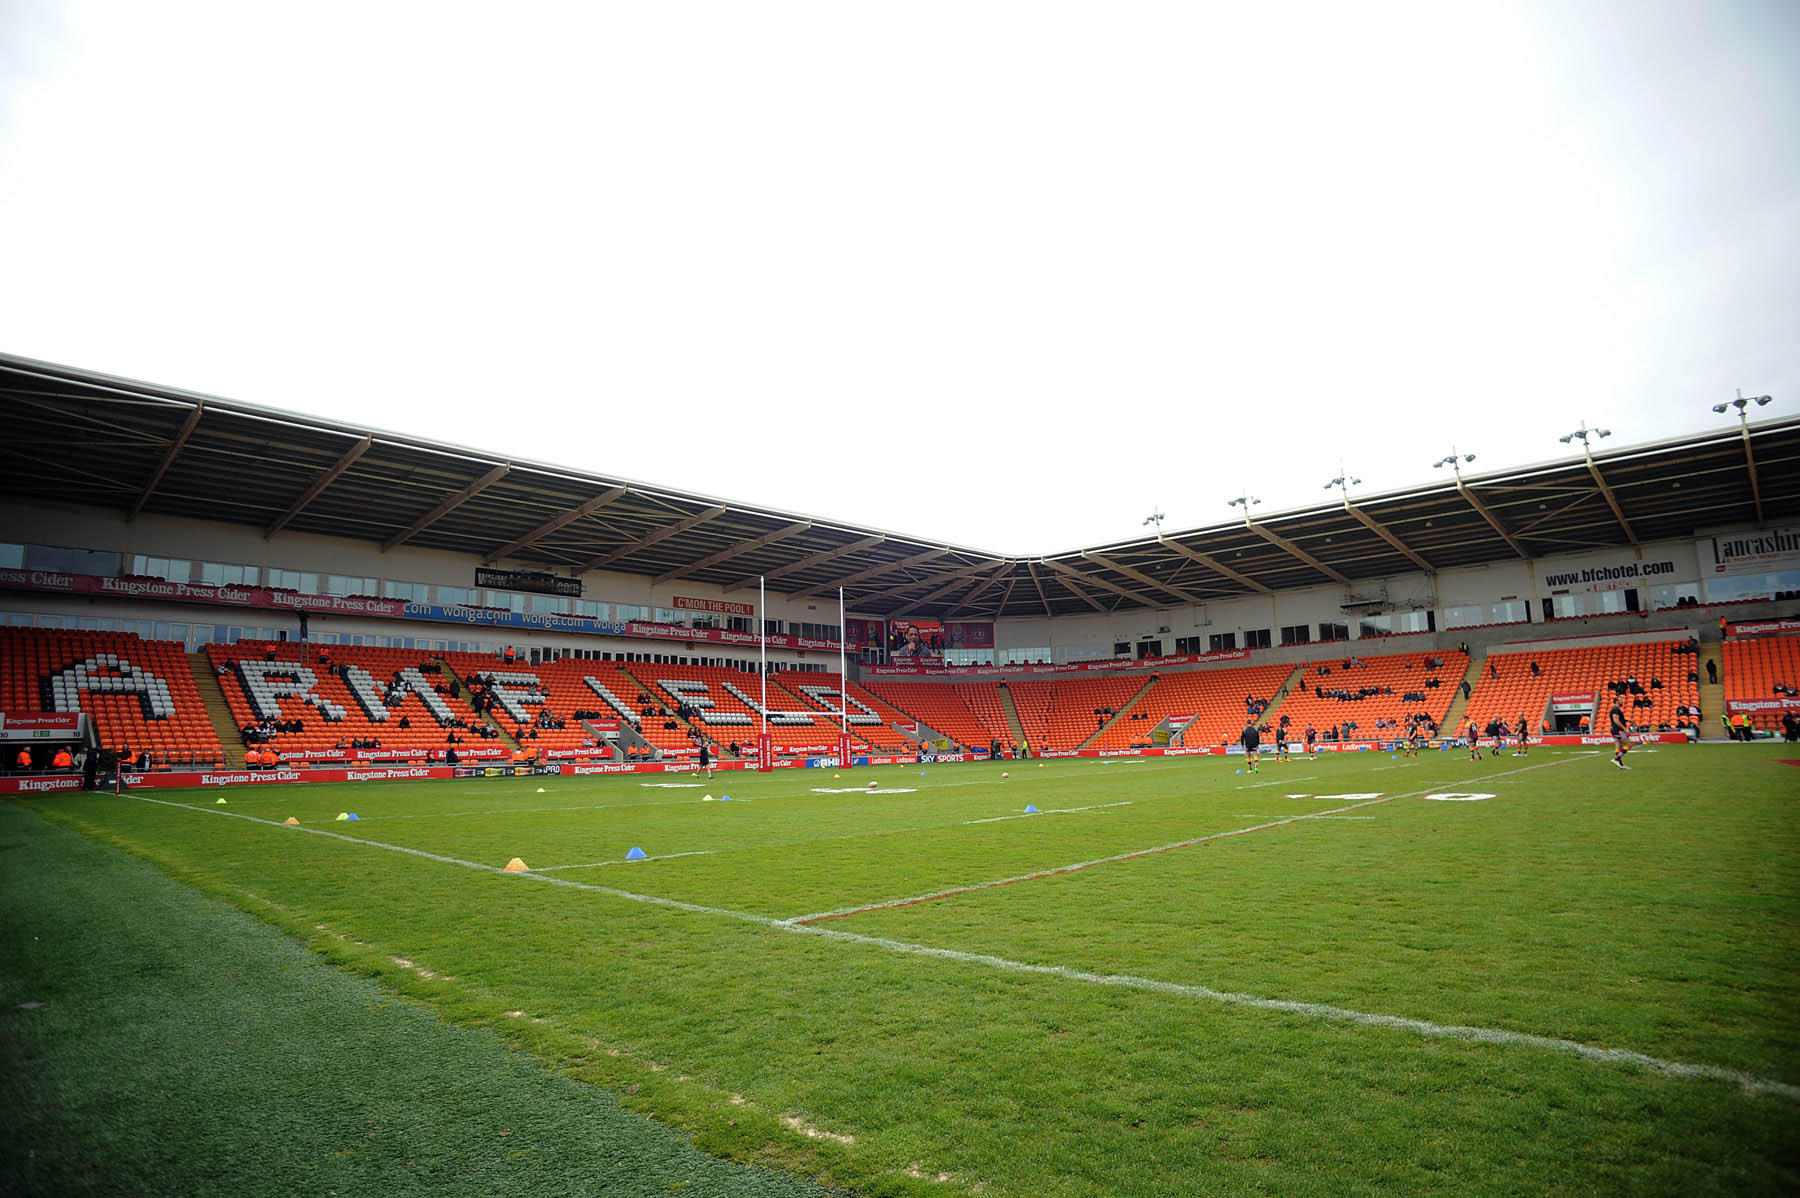 Summer Bash won’t be at Blackpool in 2022